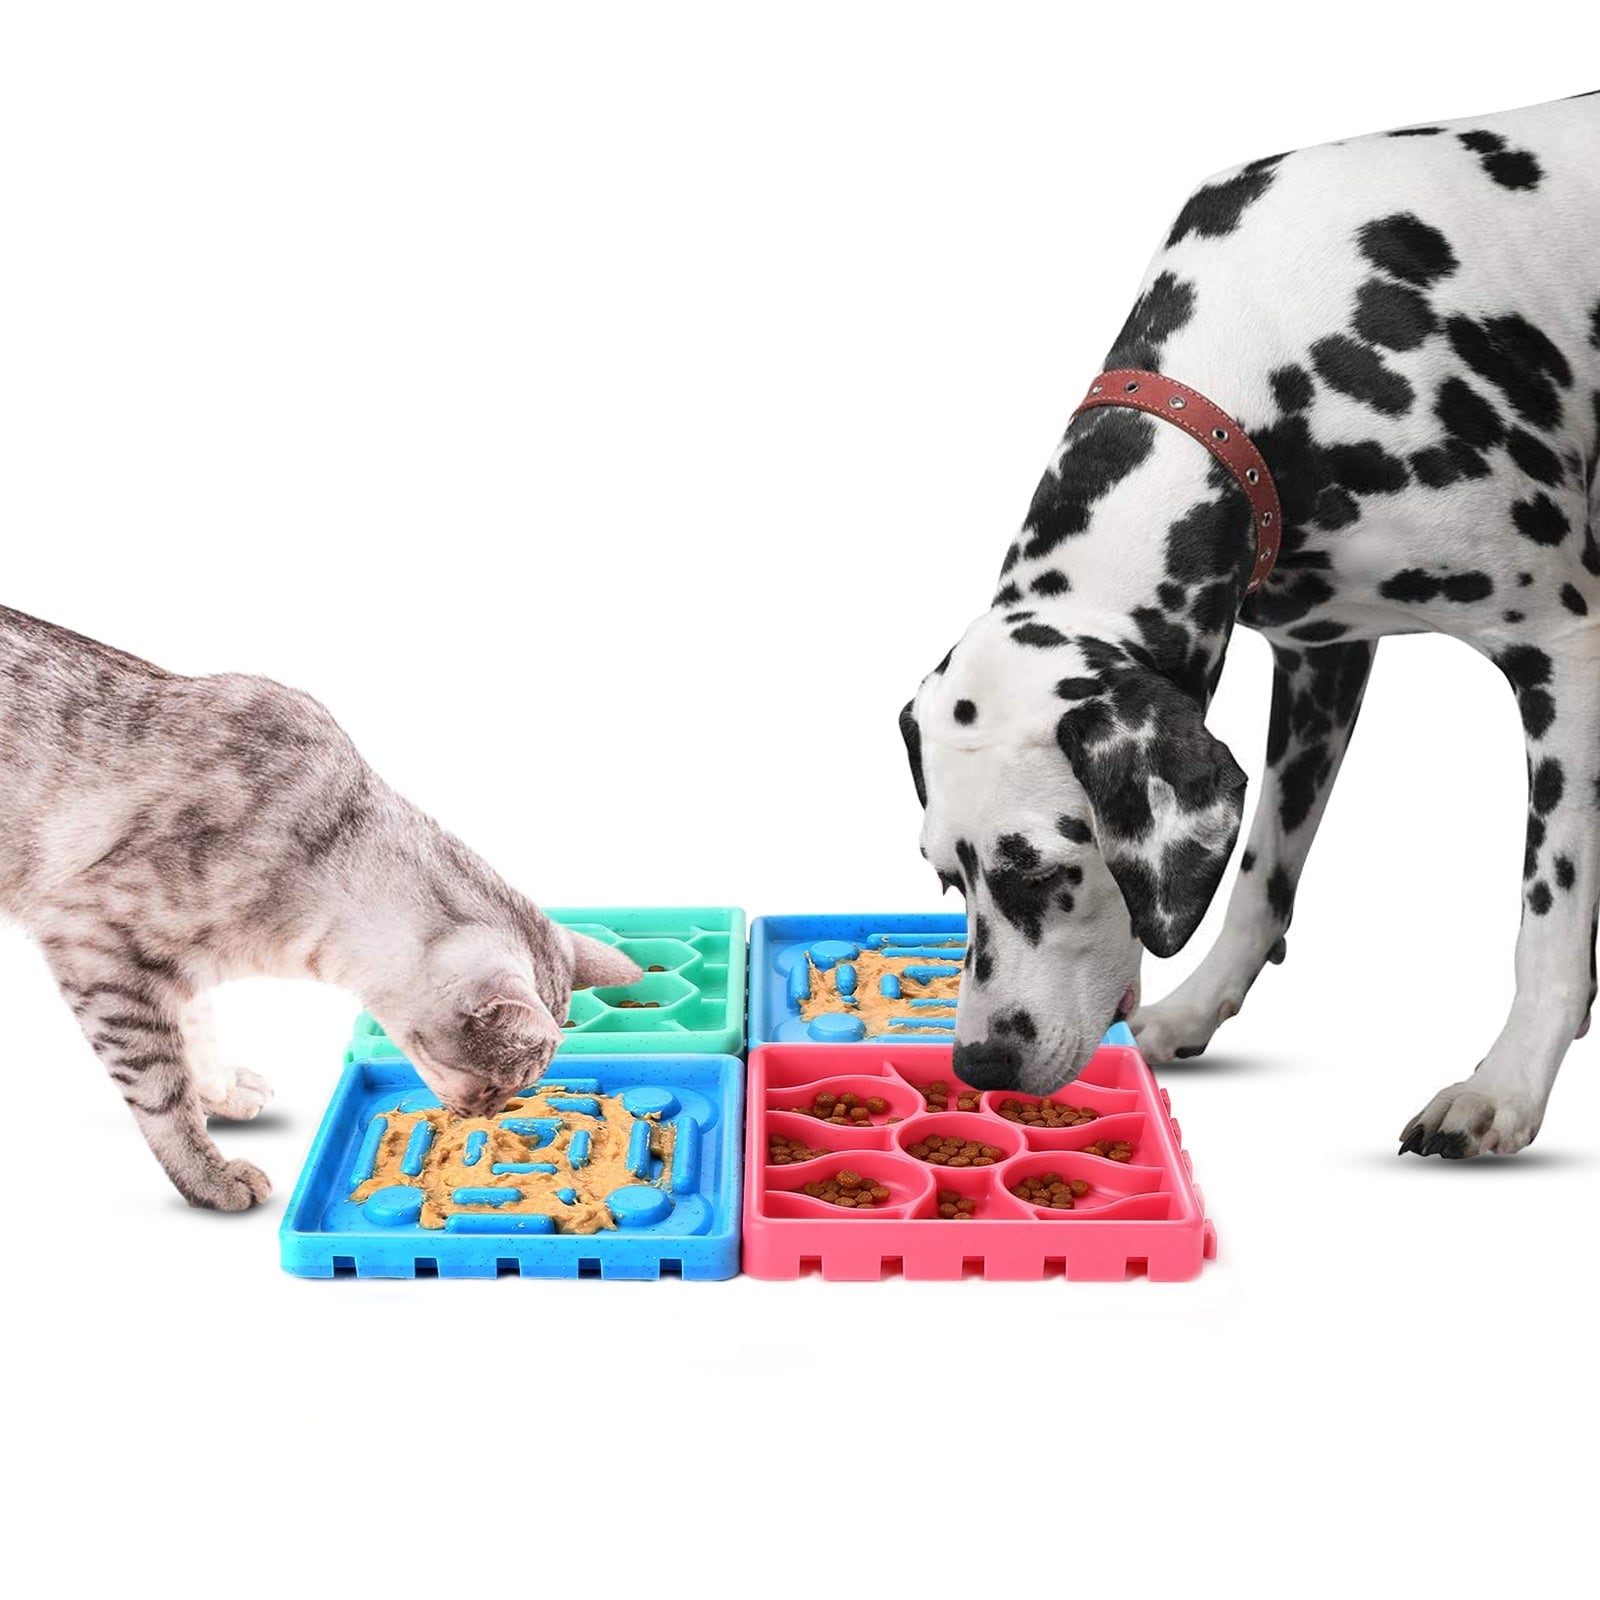 https://ak1.ostkcdn.com/images/products/is/images/direct/3f8eed70fbbd0628e4c203993bb3c38473cf2019/Ownpets-4pcs-Pet-Slow-Feeder-Tray-Set.jpg